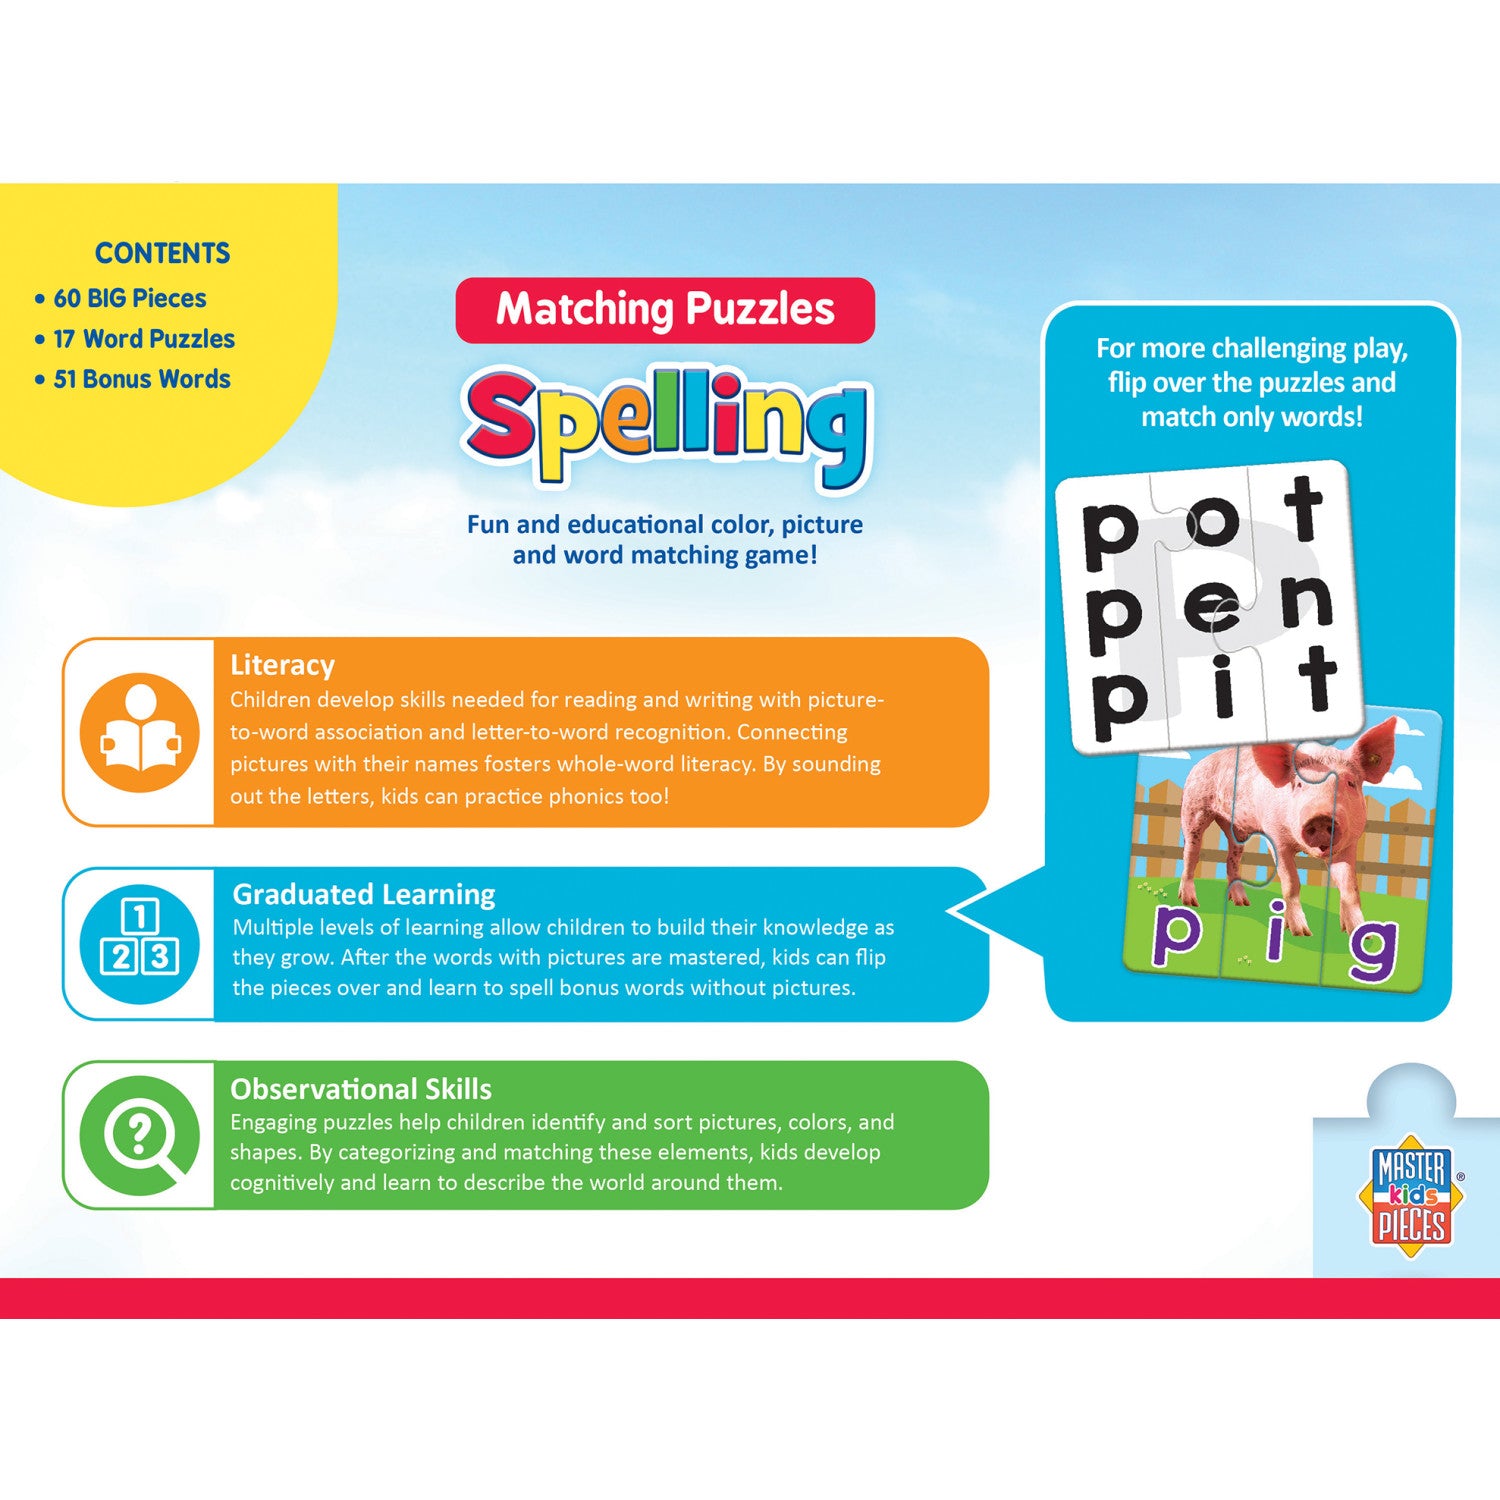 Spelling - Educational Matching Jigsaw Puzzles